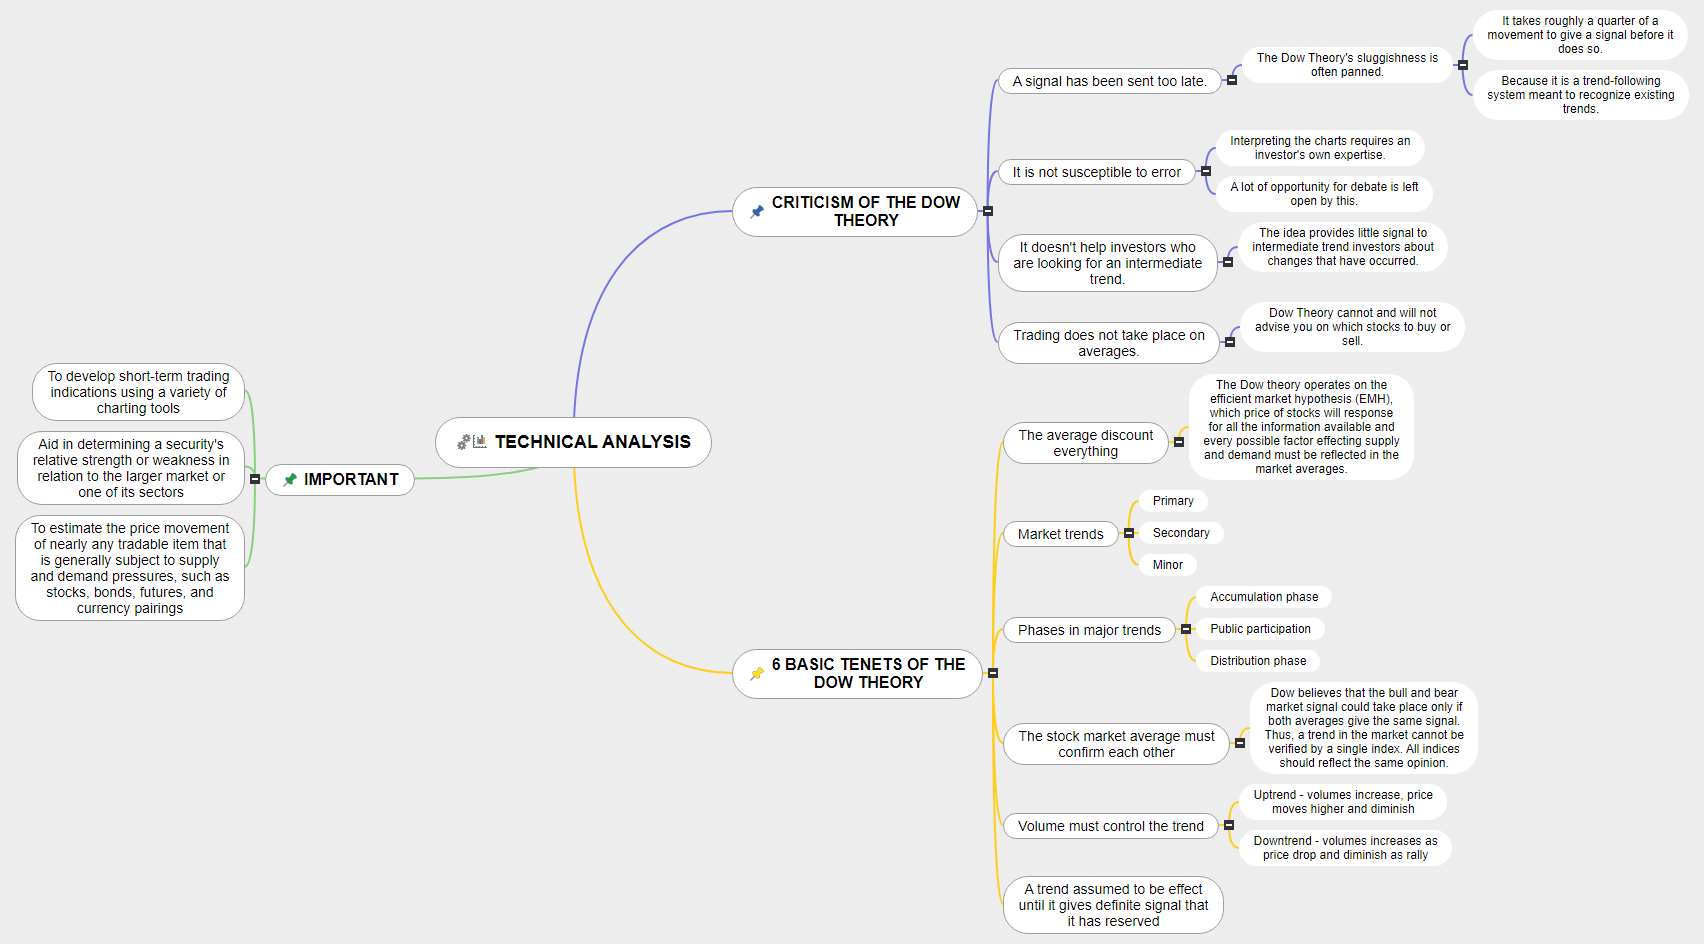 TECHNICAL ANALYSIS 2 Mind Map